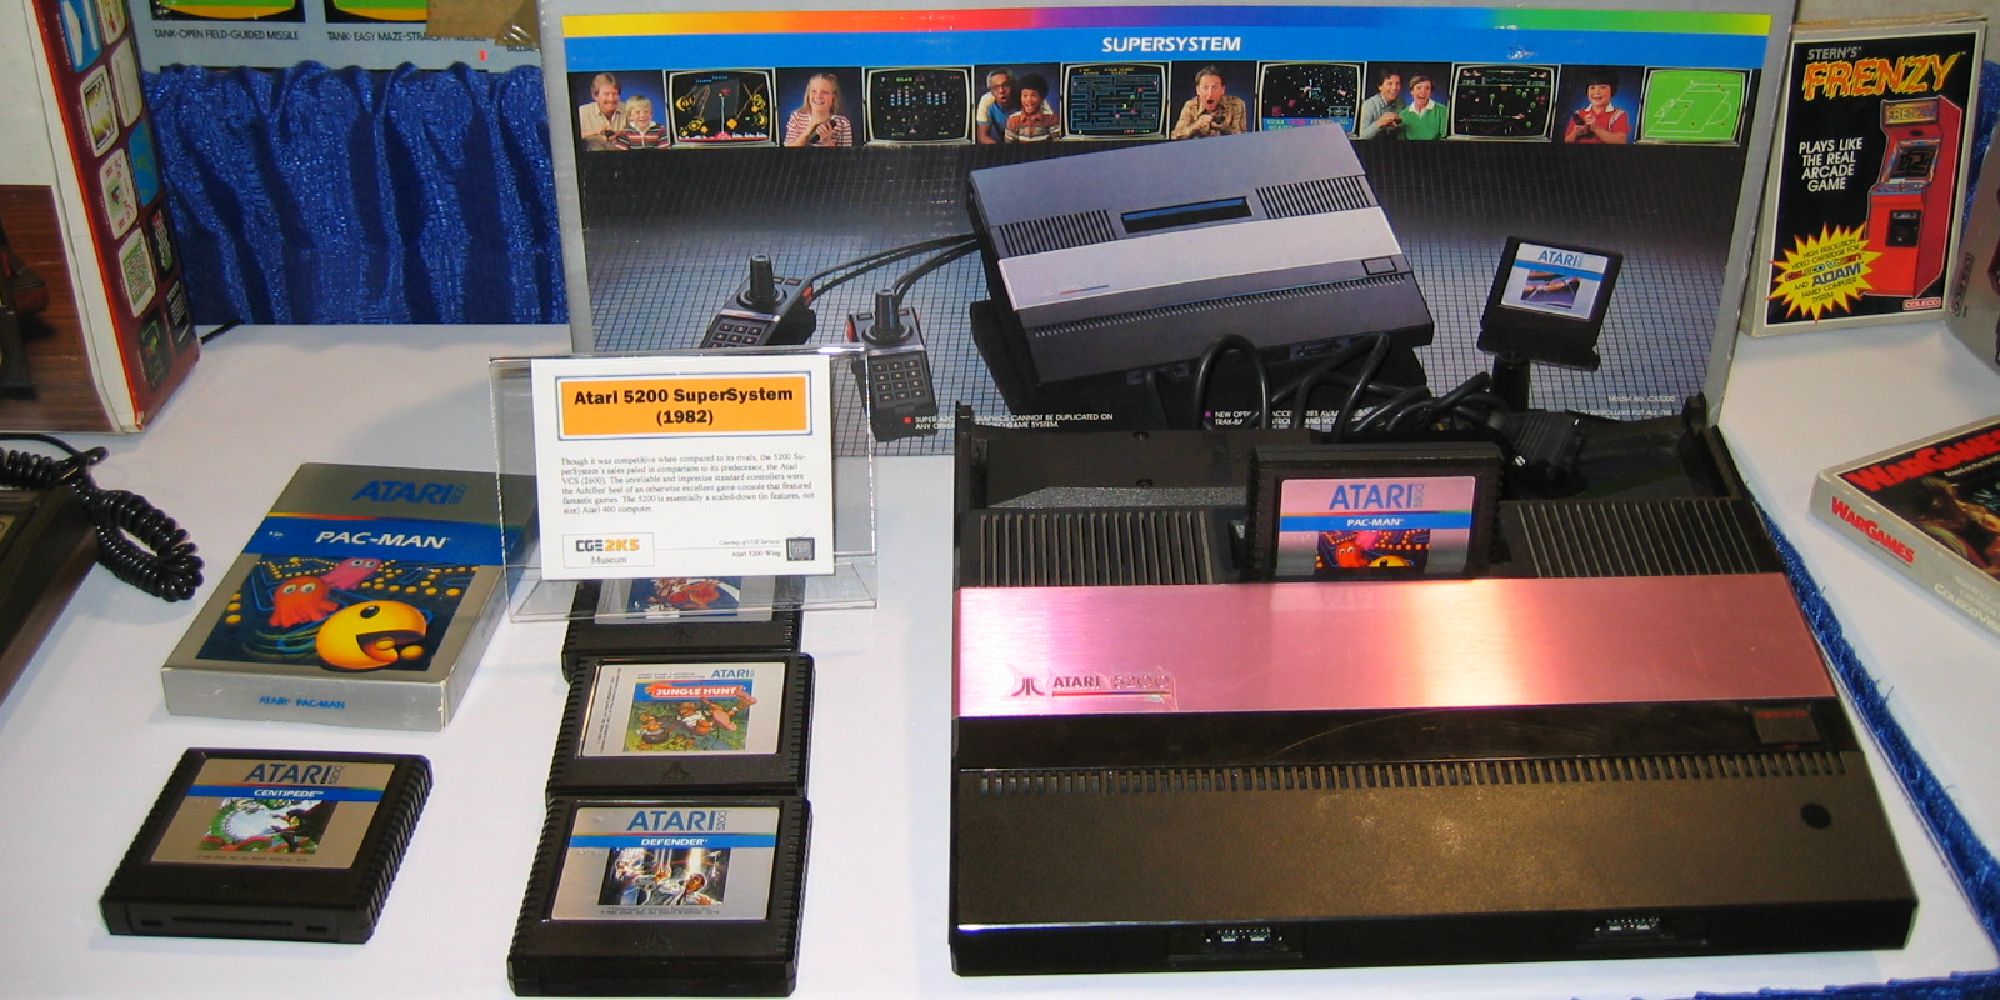 The Atari 5200 on display next to several game cartridges and boxes